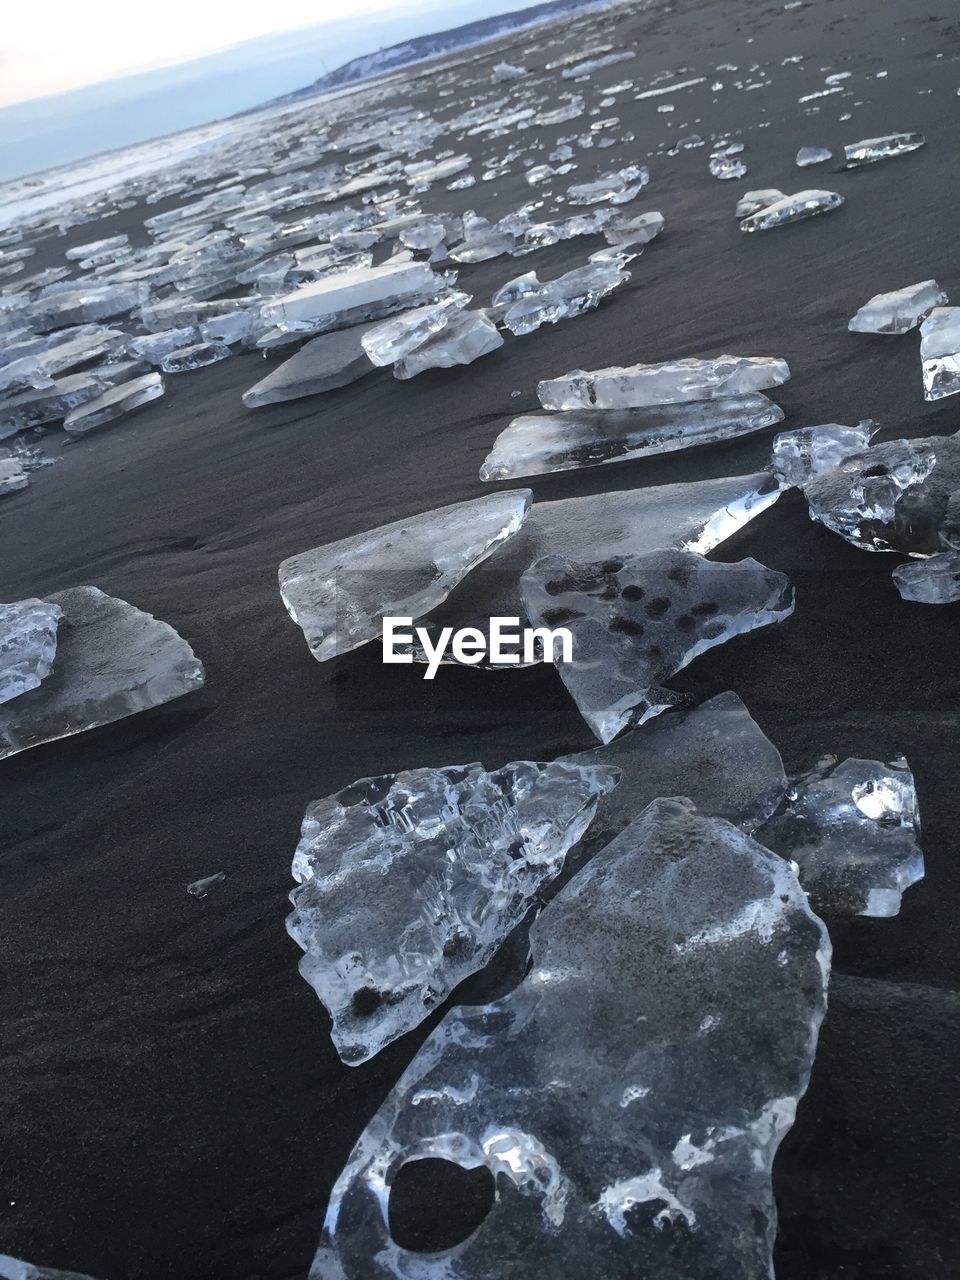 CLOSE-UP OF FROZEN BEACH AGAINST SKY